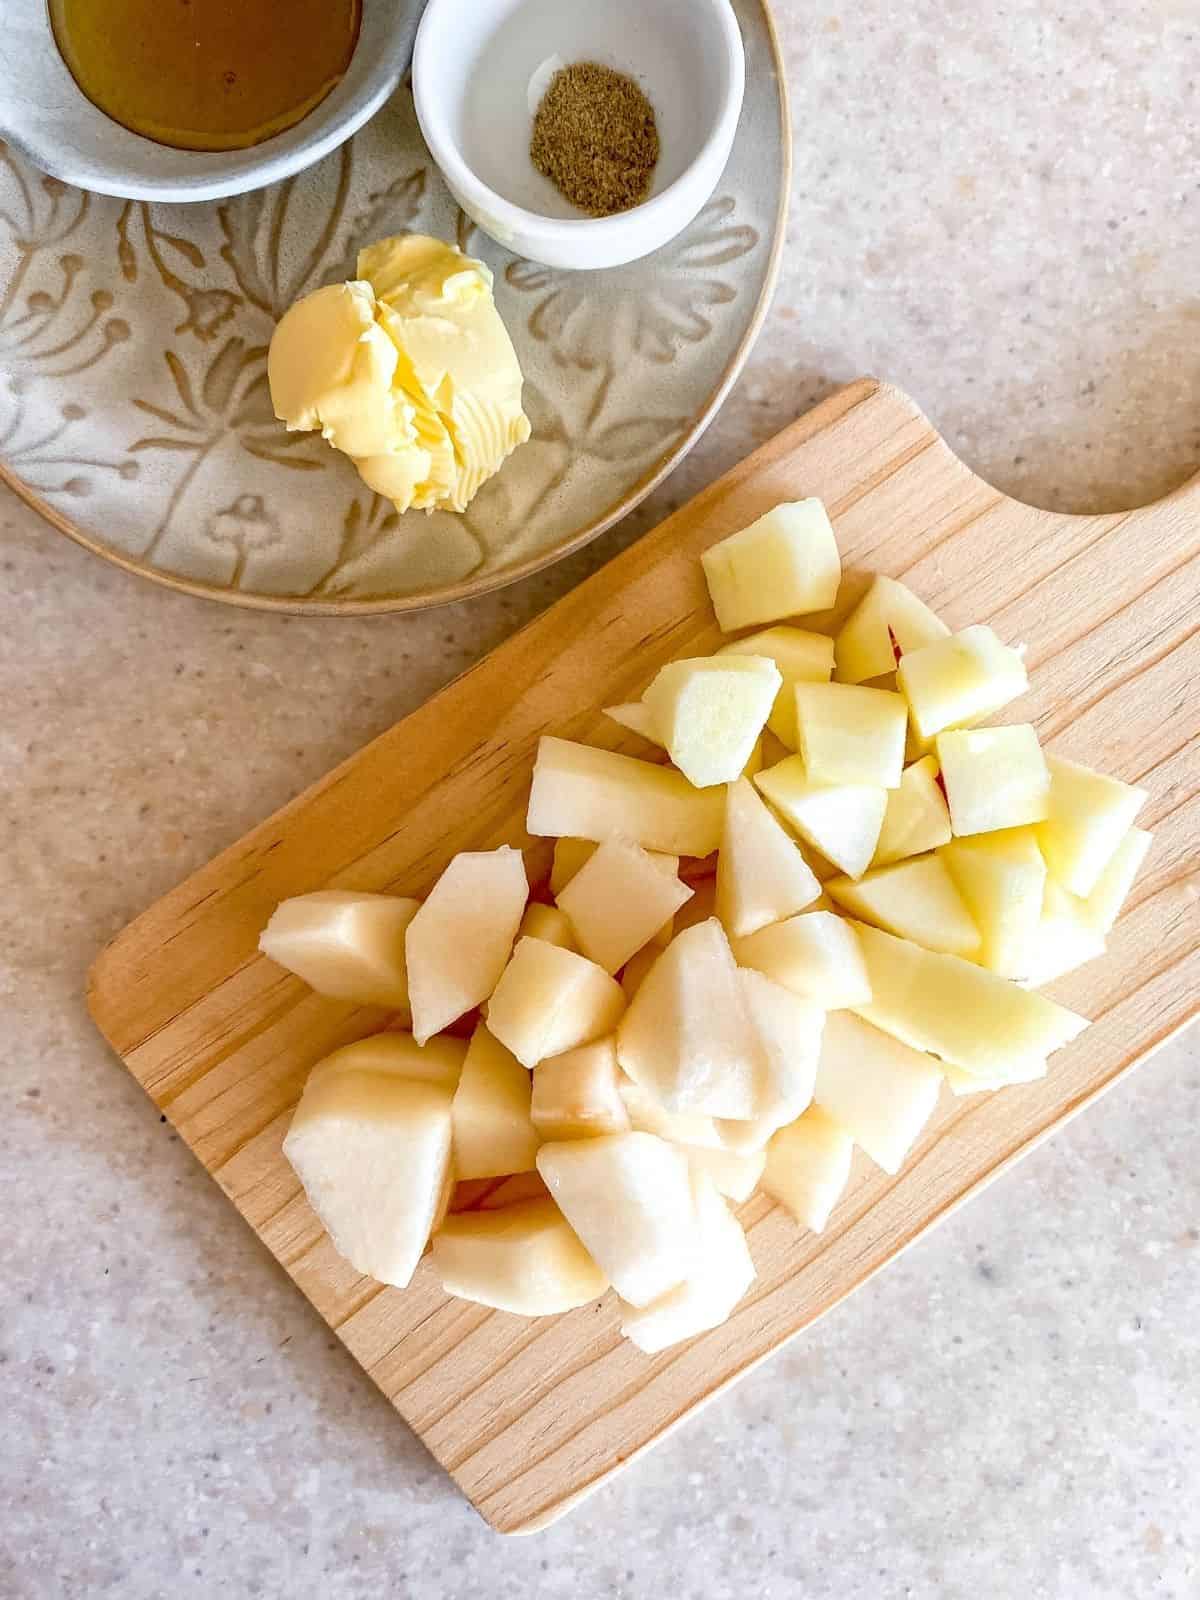 chopped apple and pear on a wooden chopping board.